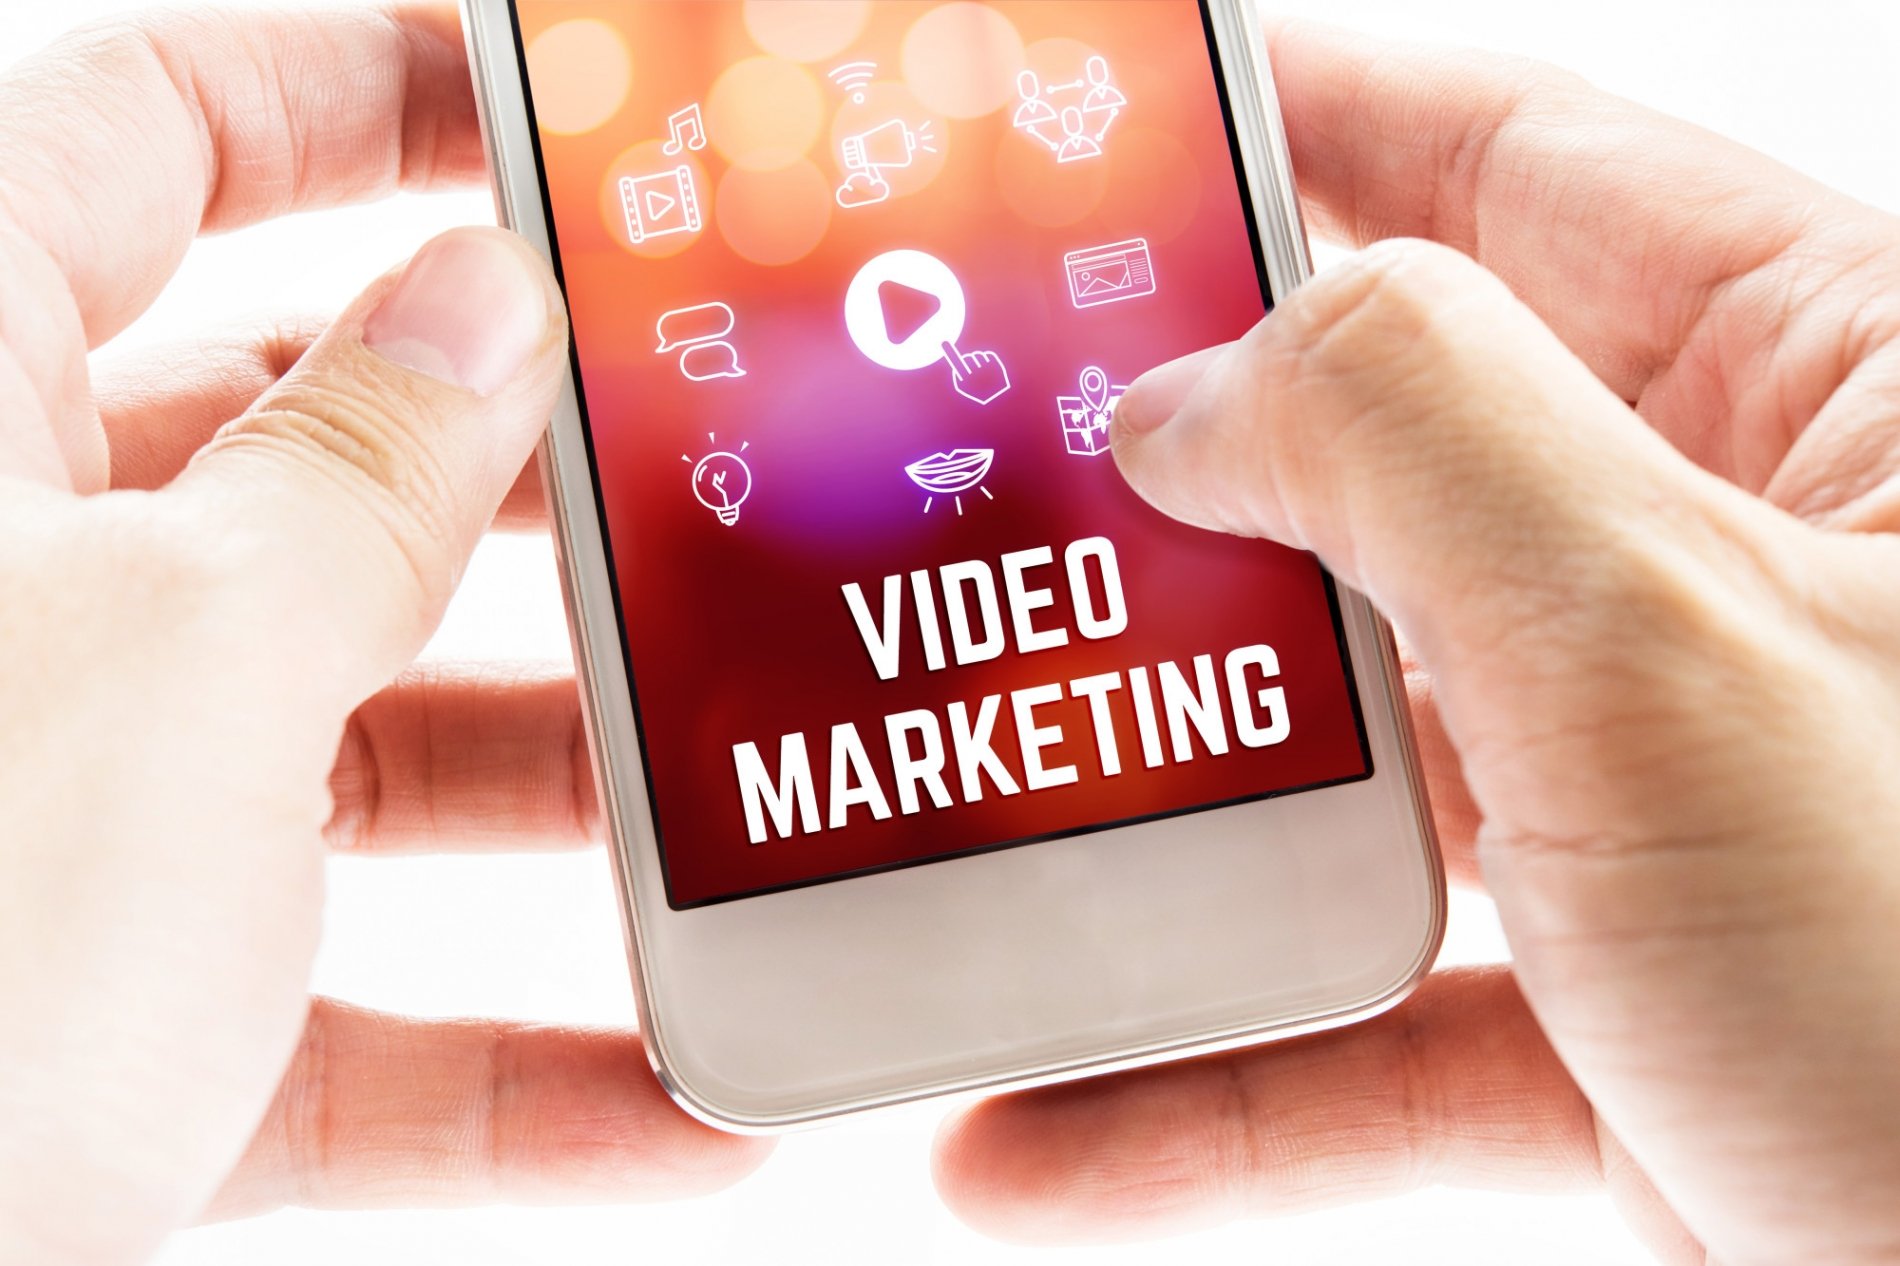 7 Awesome Benefits of Video Marketing That You Should Know About